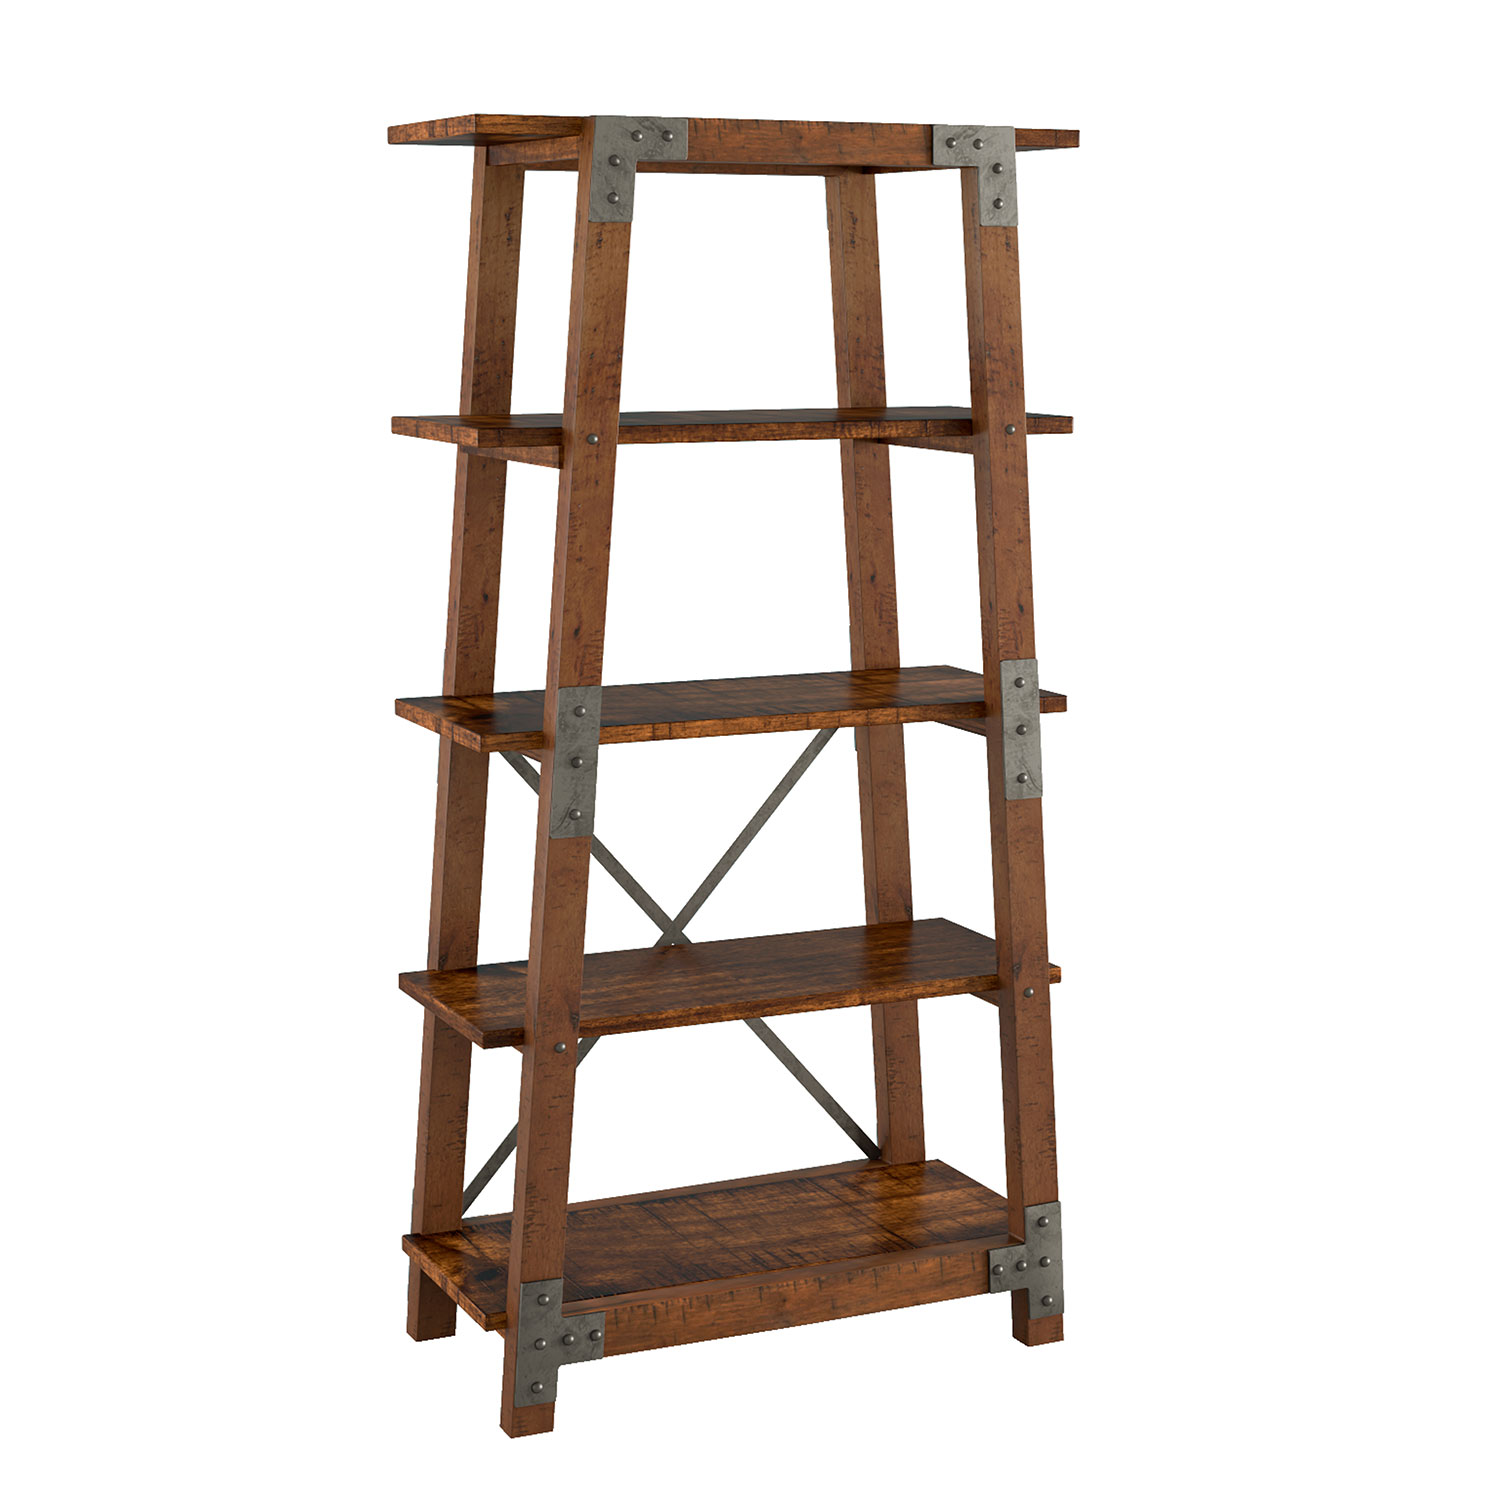 Homelegance Holverson Bookcase - Rustic Brown Milk Crate